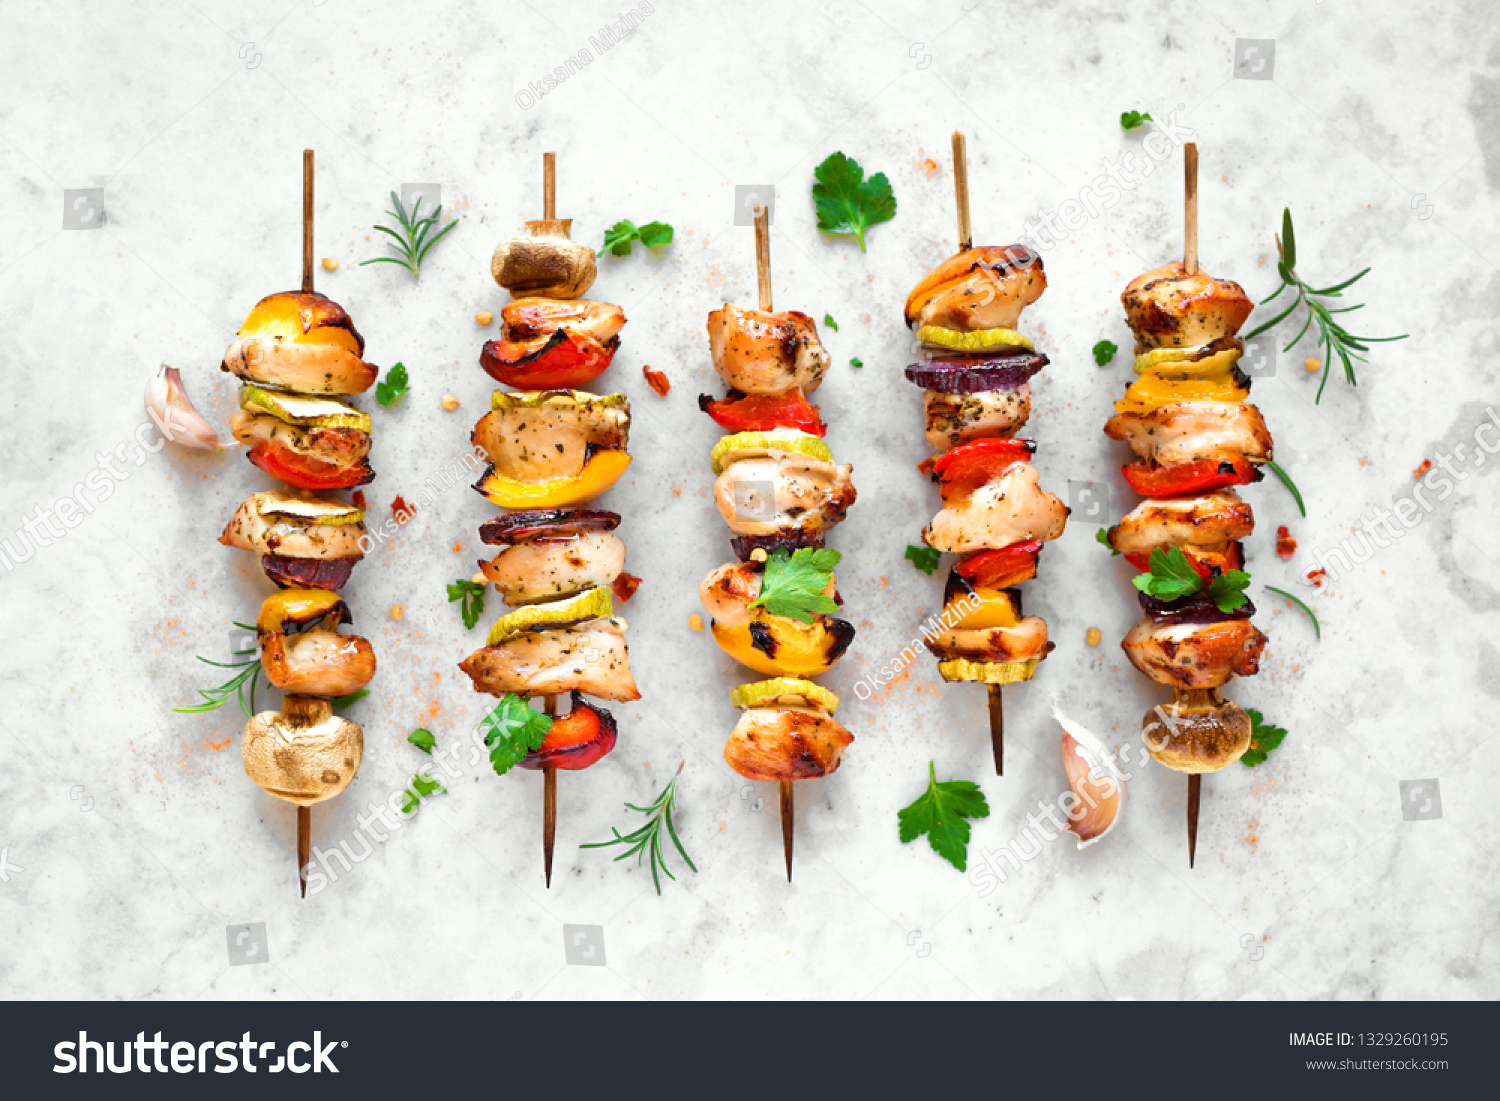 Grilled vegetable and chicken skewers with  bell peppers, zucchini, onion and mushrooms on white marble background, top view. Meat and vegetables kebabs on skewers. #1329260195